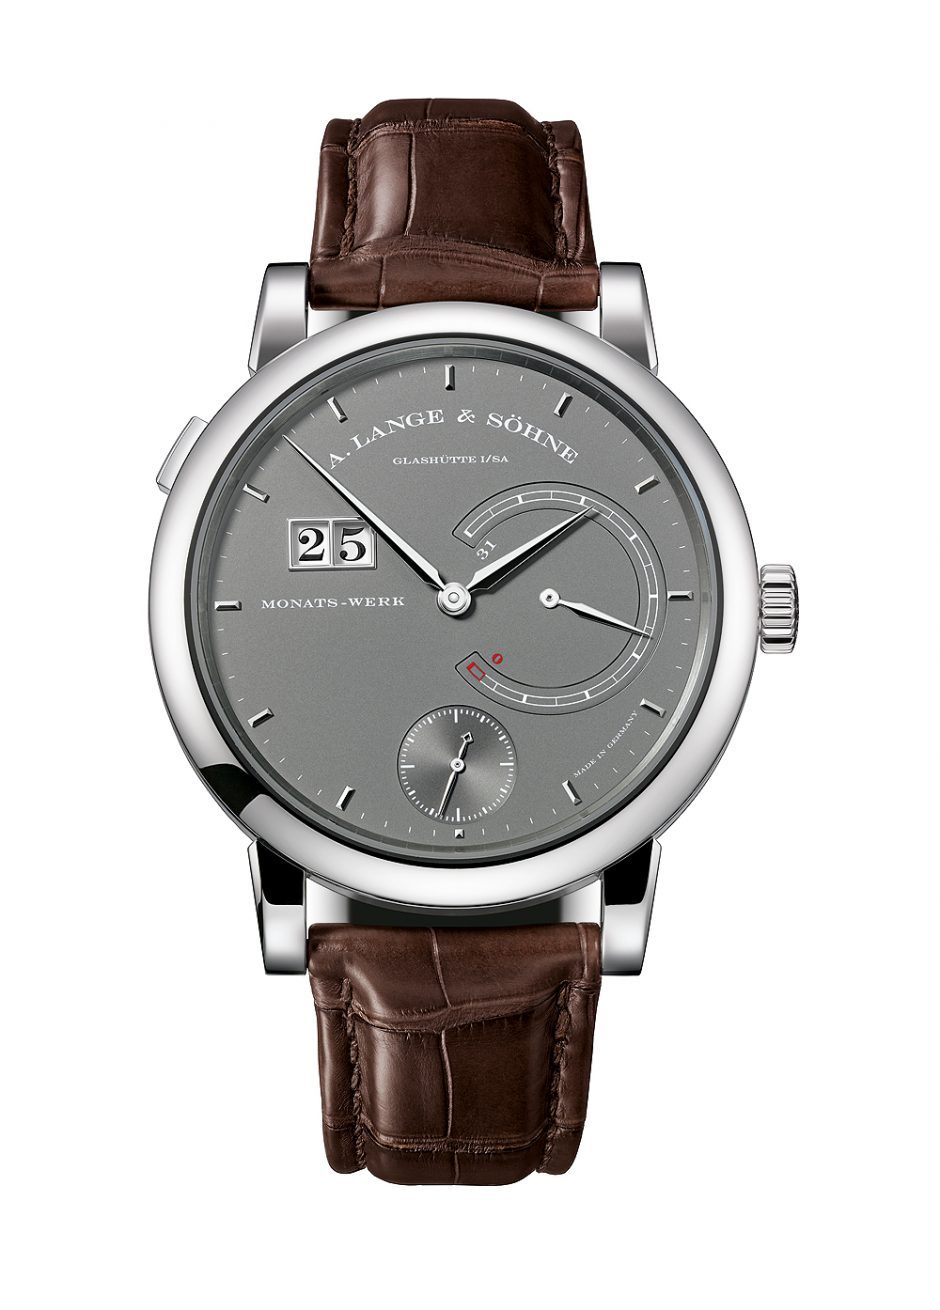 Power Packed: A. Lange & Söhne Lange 31 in White Gold | WatchTime - USA ...